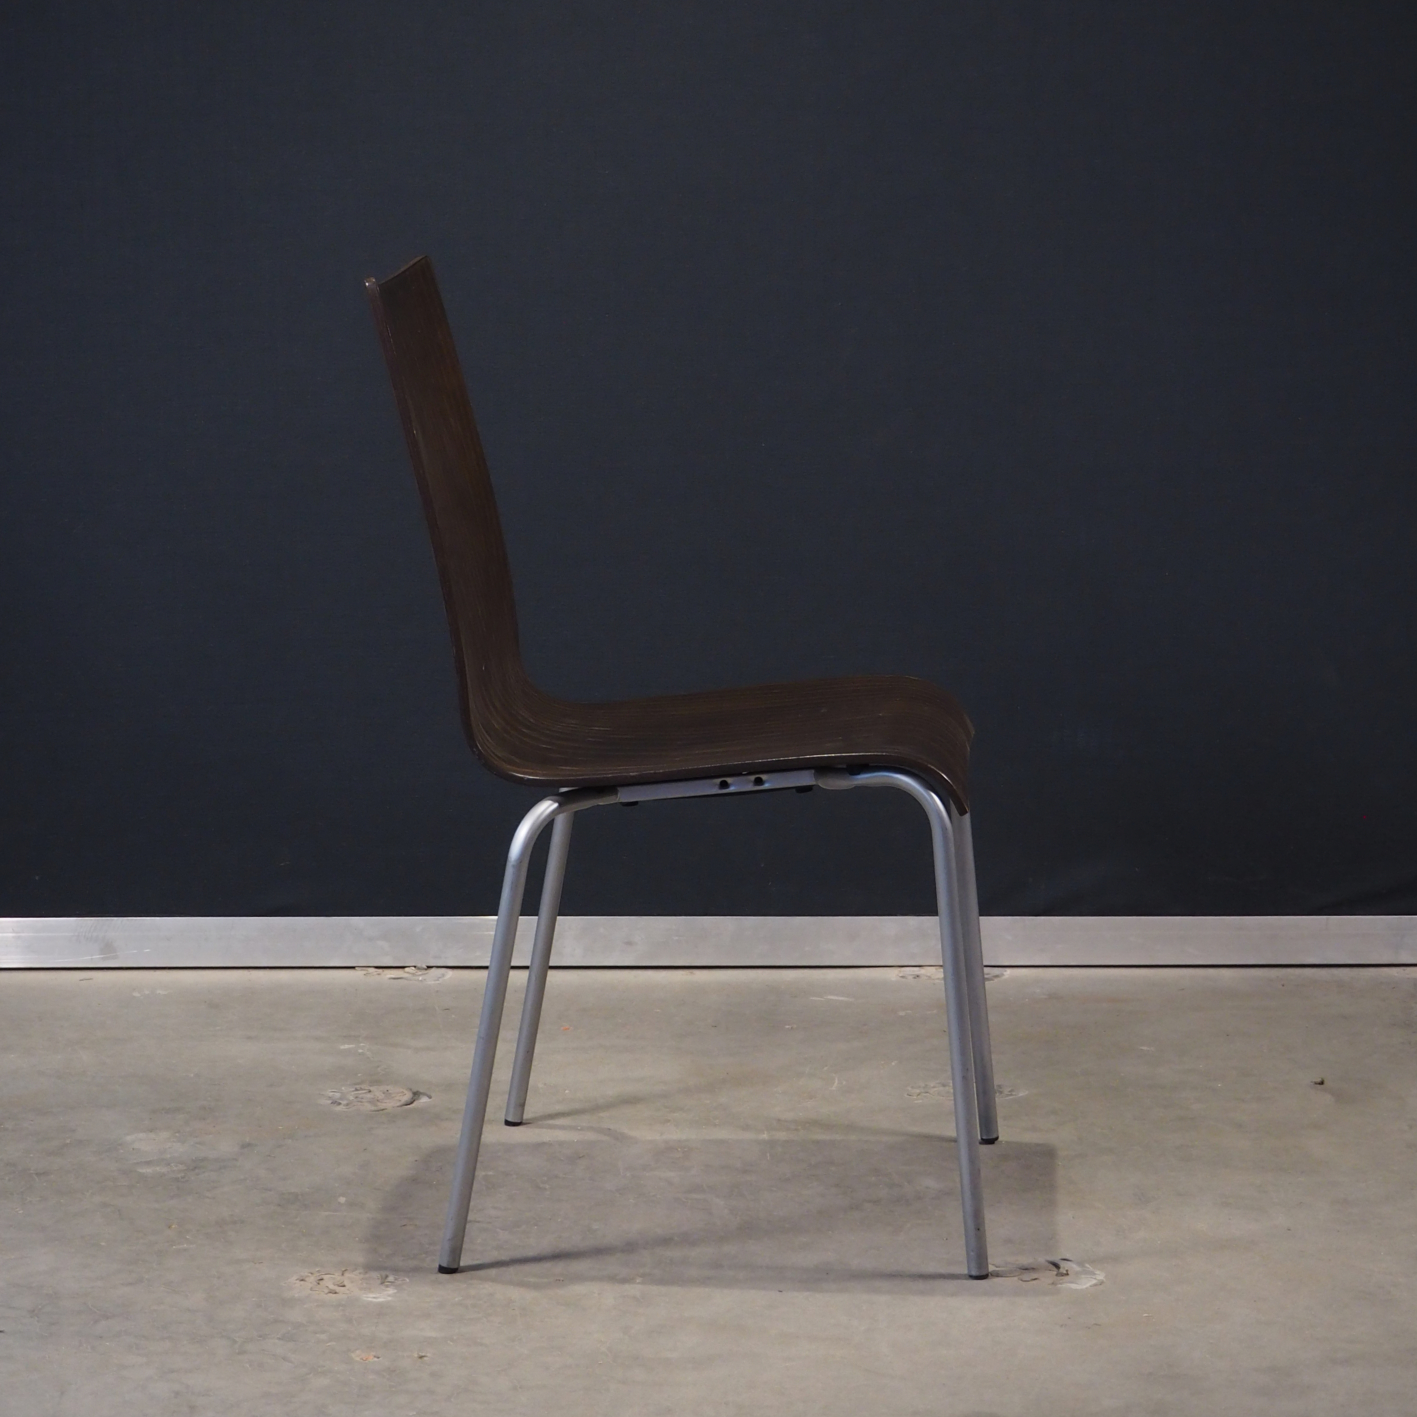 Stackable chair 'Garcia' by Martin Mostböck for Hiller